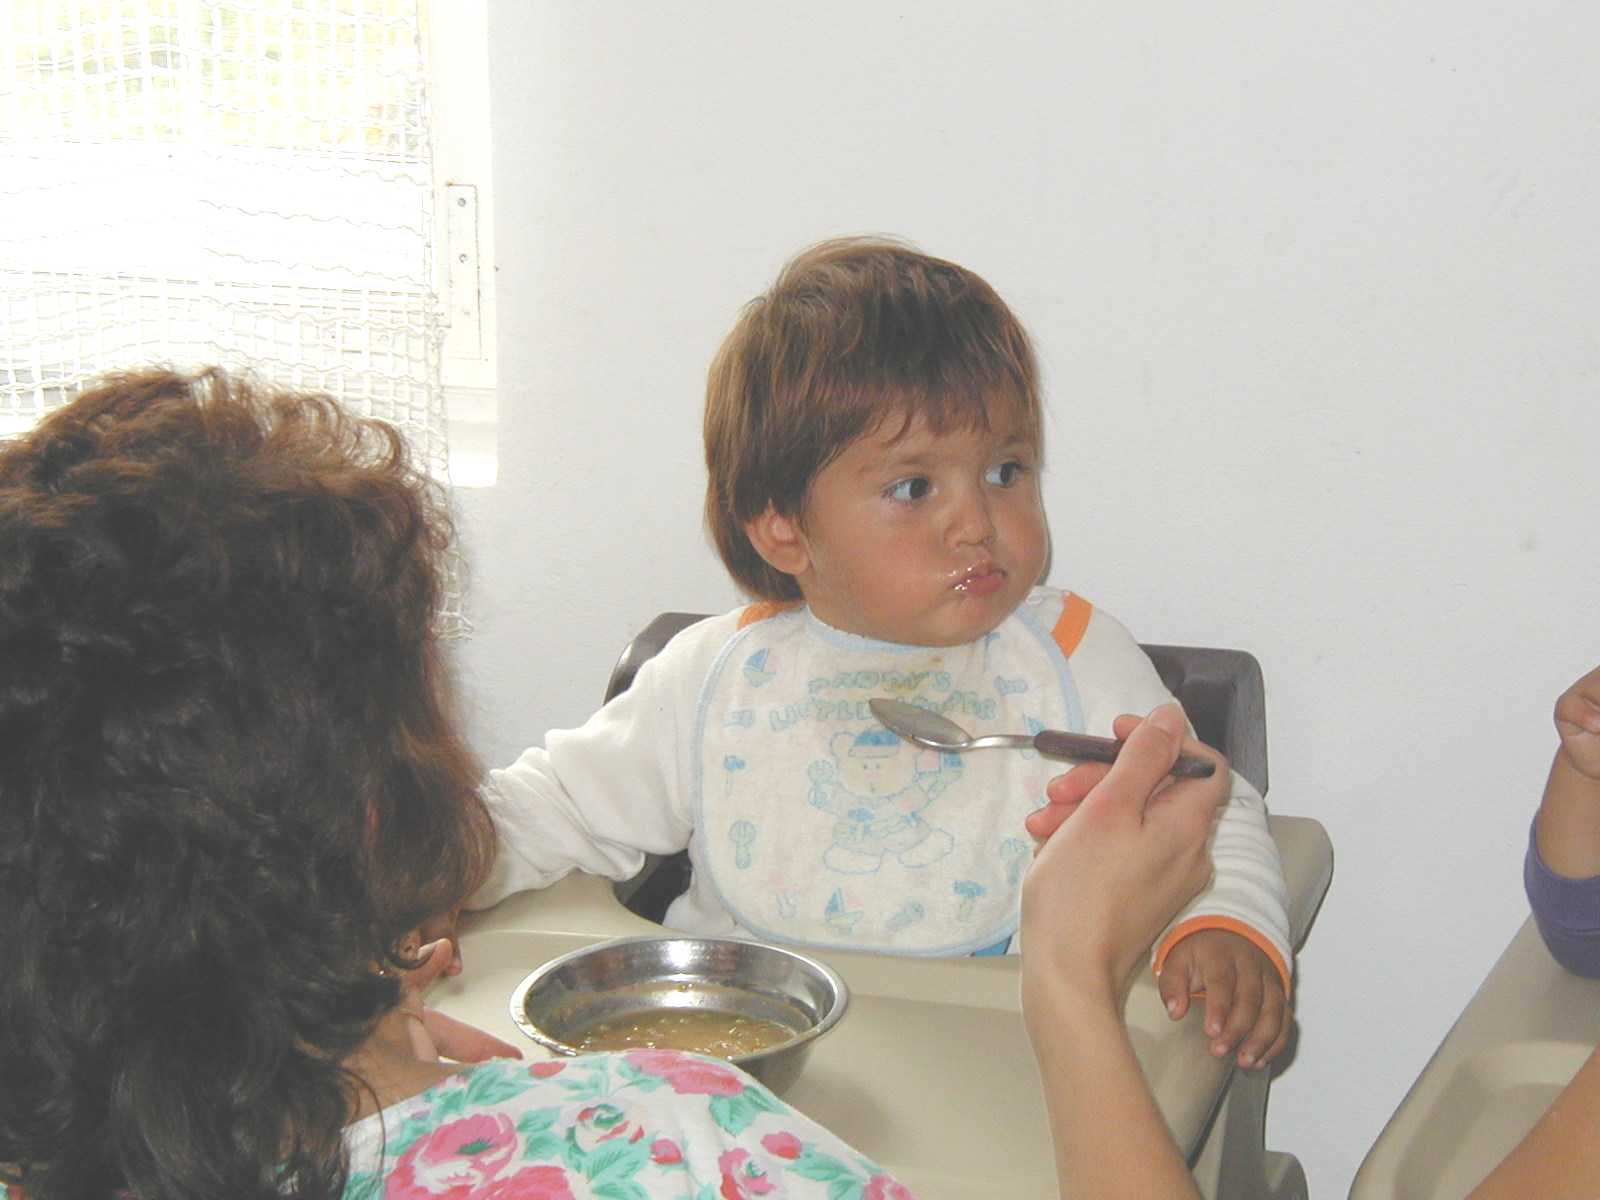 A caregiver feeding one of the babies.